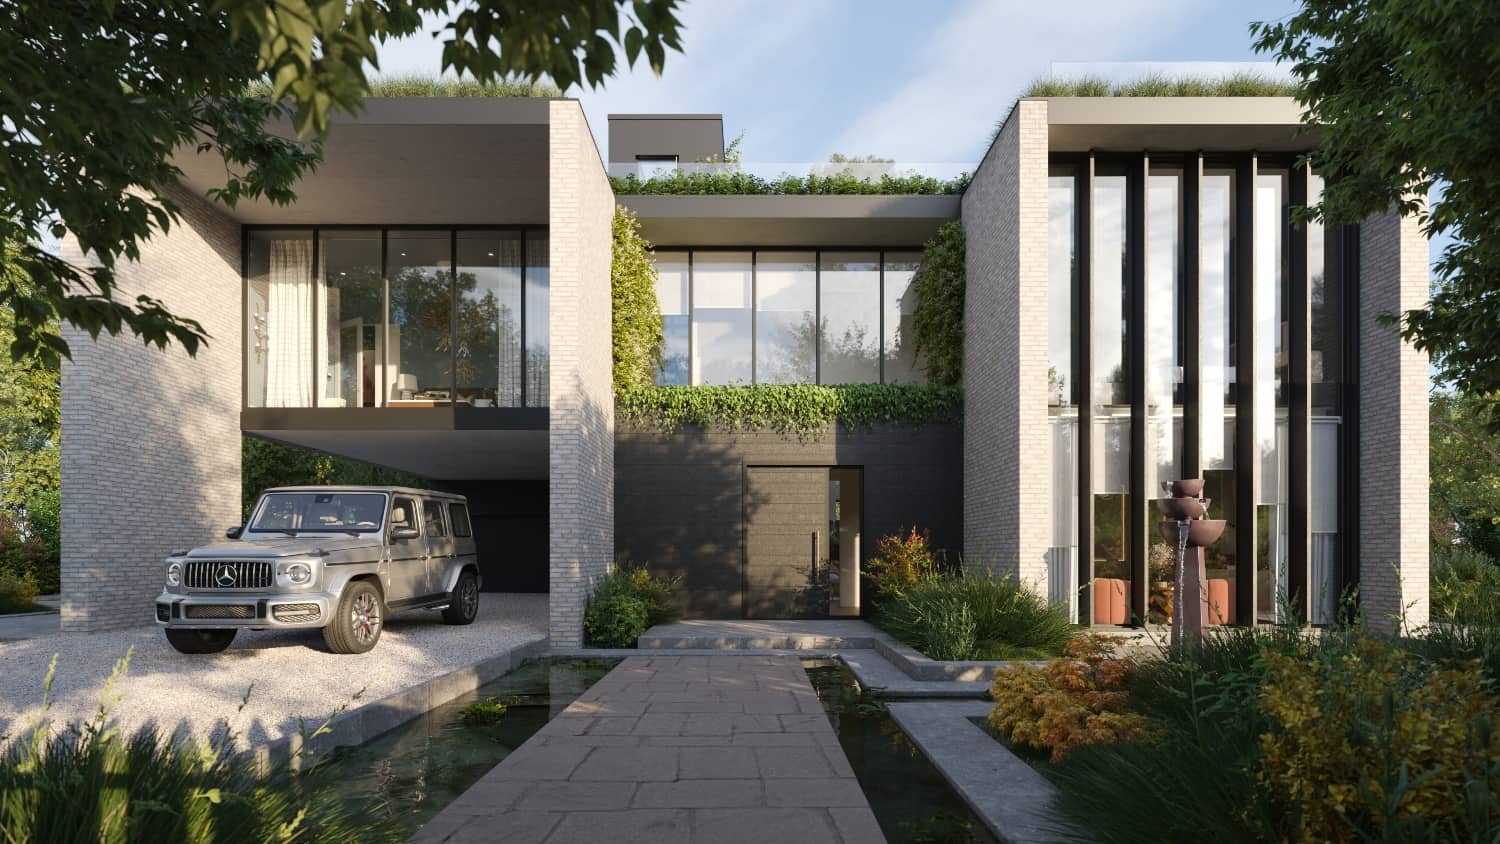 Architectural Digest Teams Up With BIDN On Sustainable Show Home